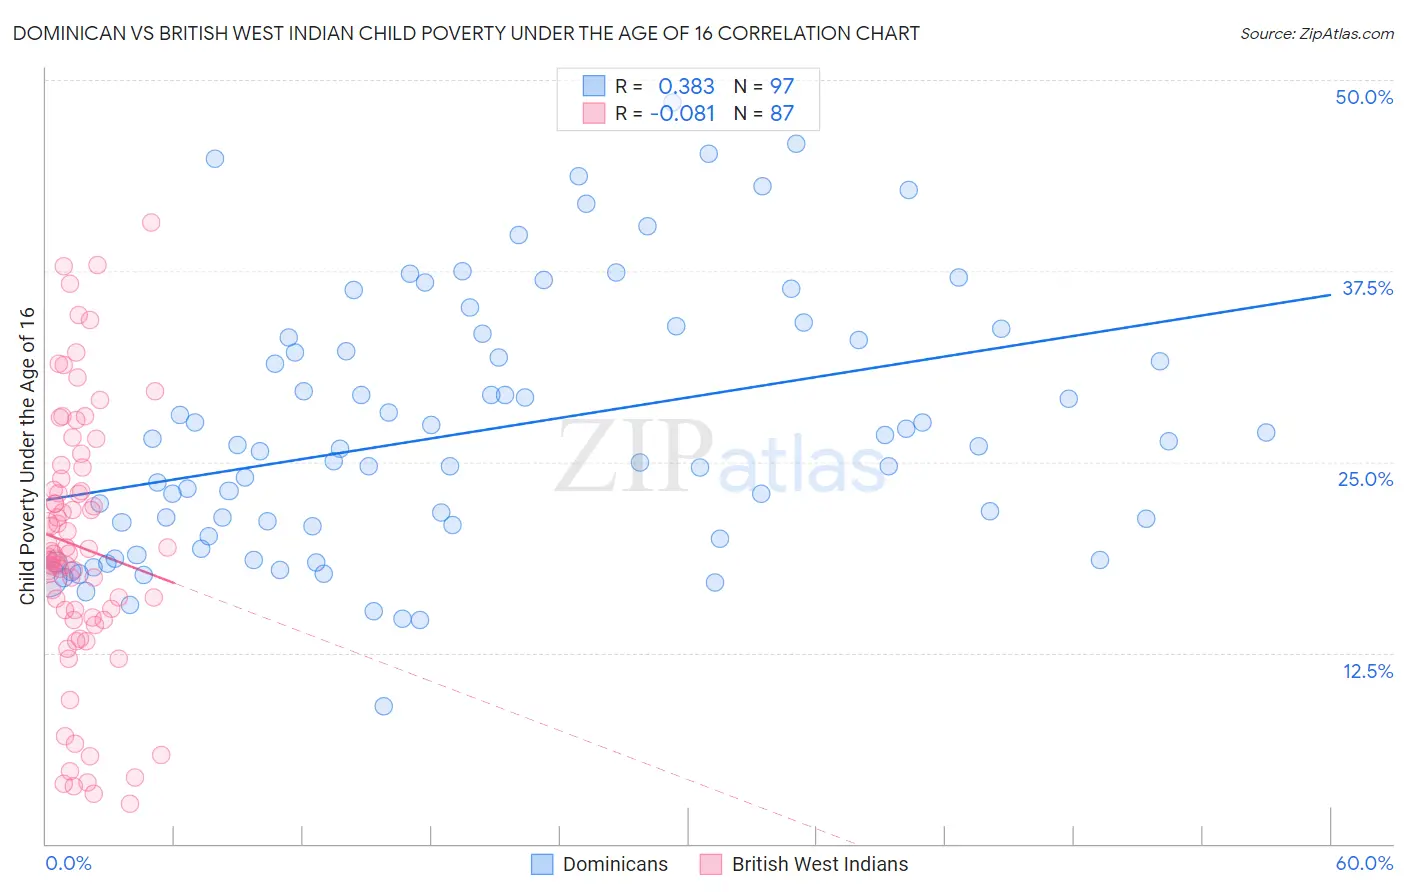 Dominican vs British West Indian Child Poverty Under the Age of 16